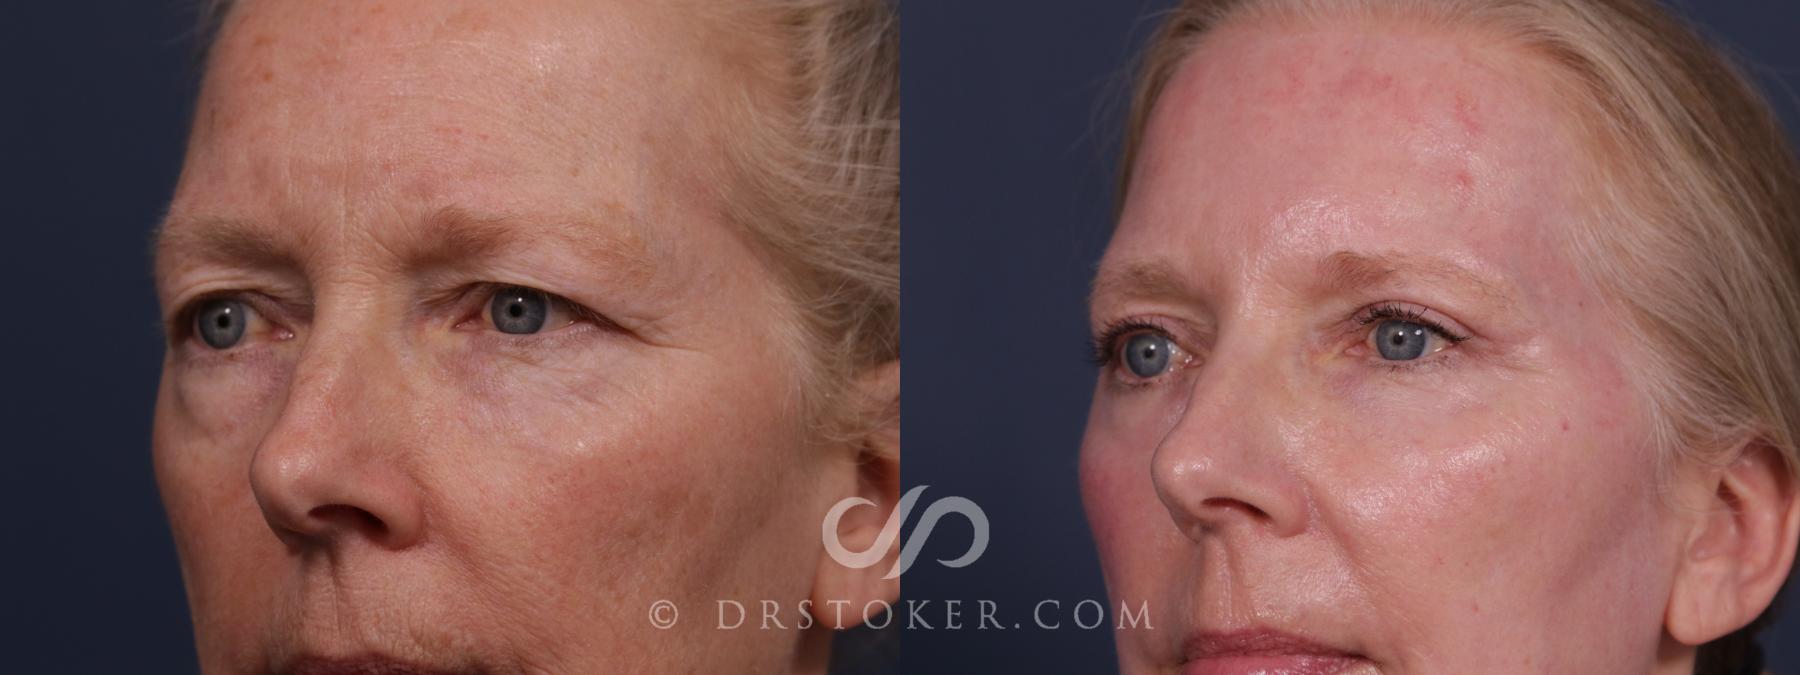 Before & After Laser Skin Resurfacing  Case 2190 Left Oblique View in Los Angeles, CA